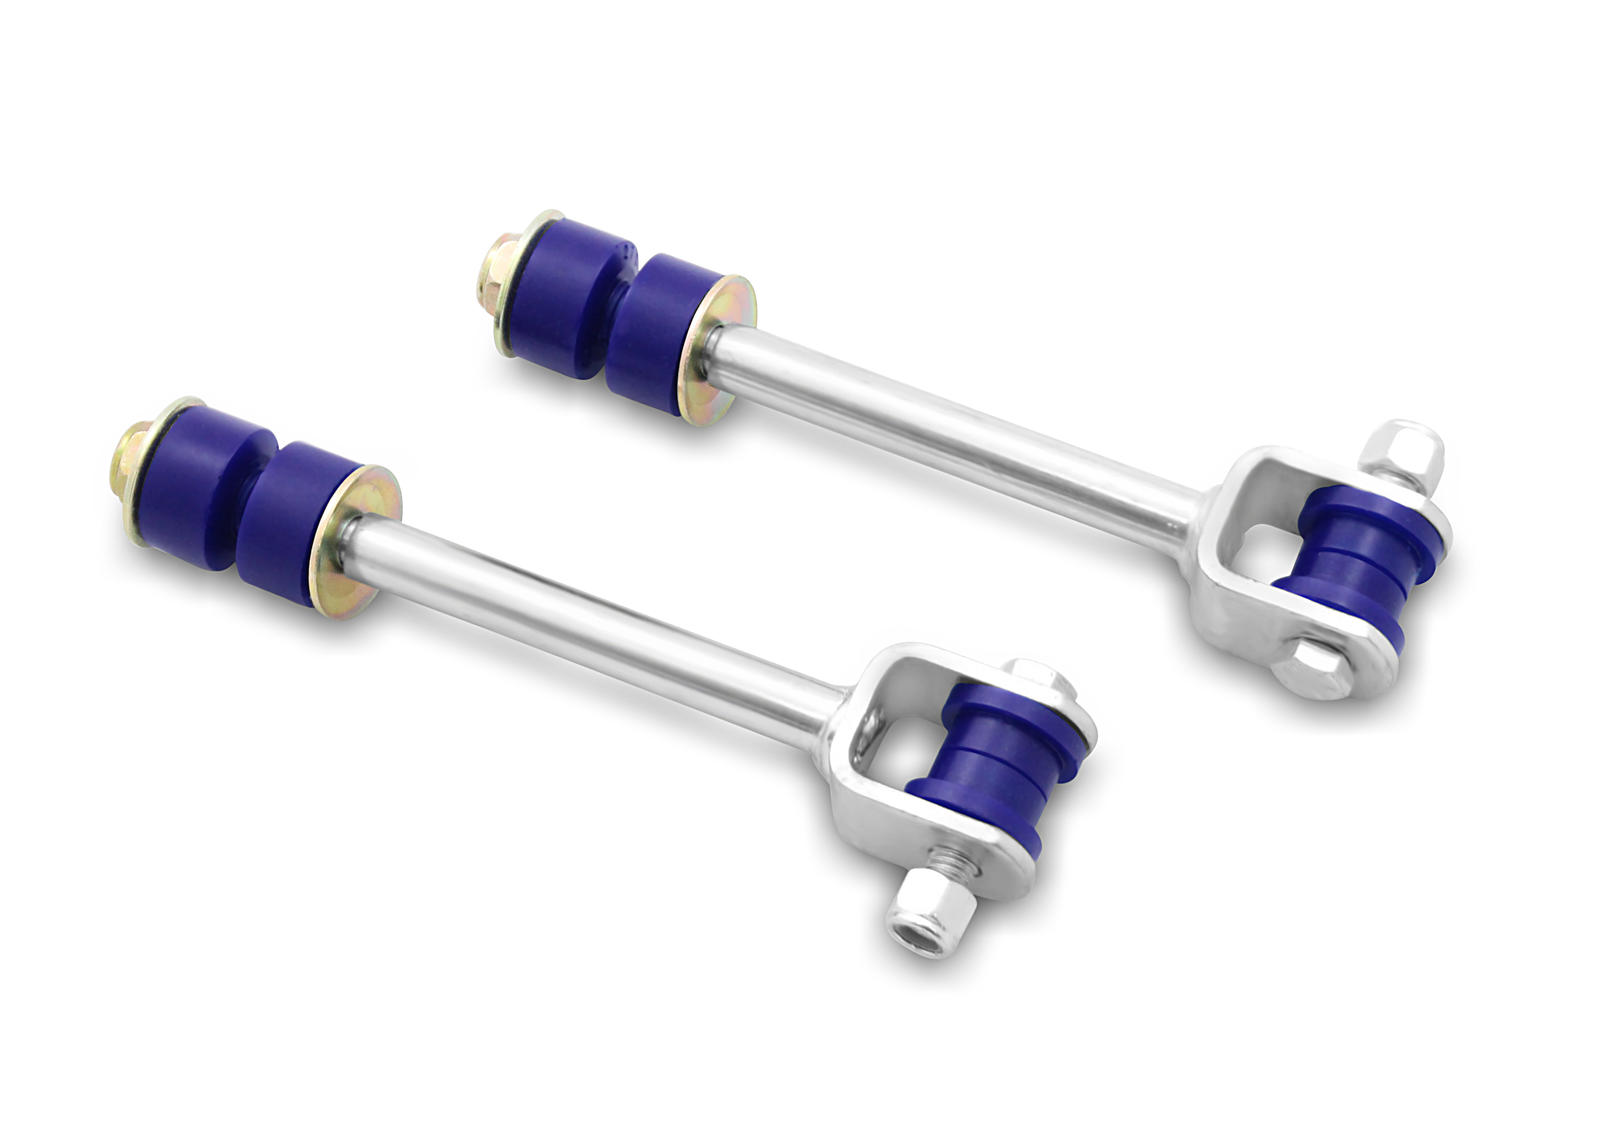 Rear Heavy Duty Sway Bar Link Kit - 20mm longer to suit lifted vehicles